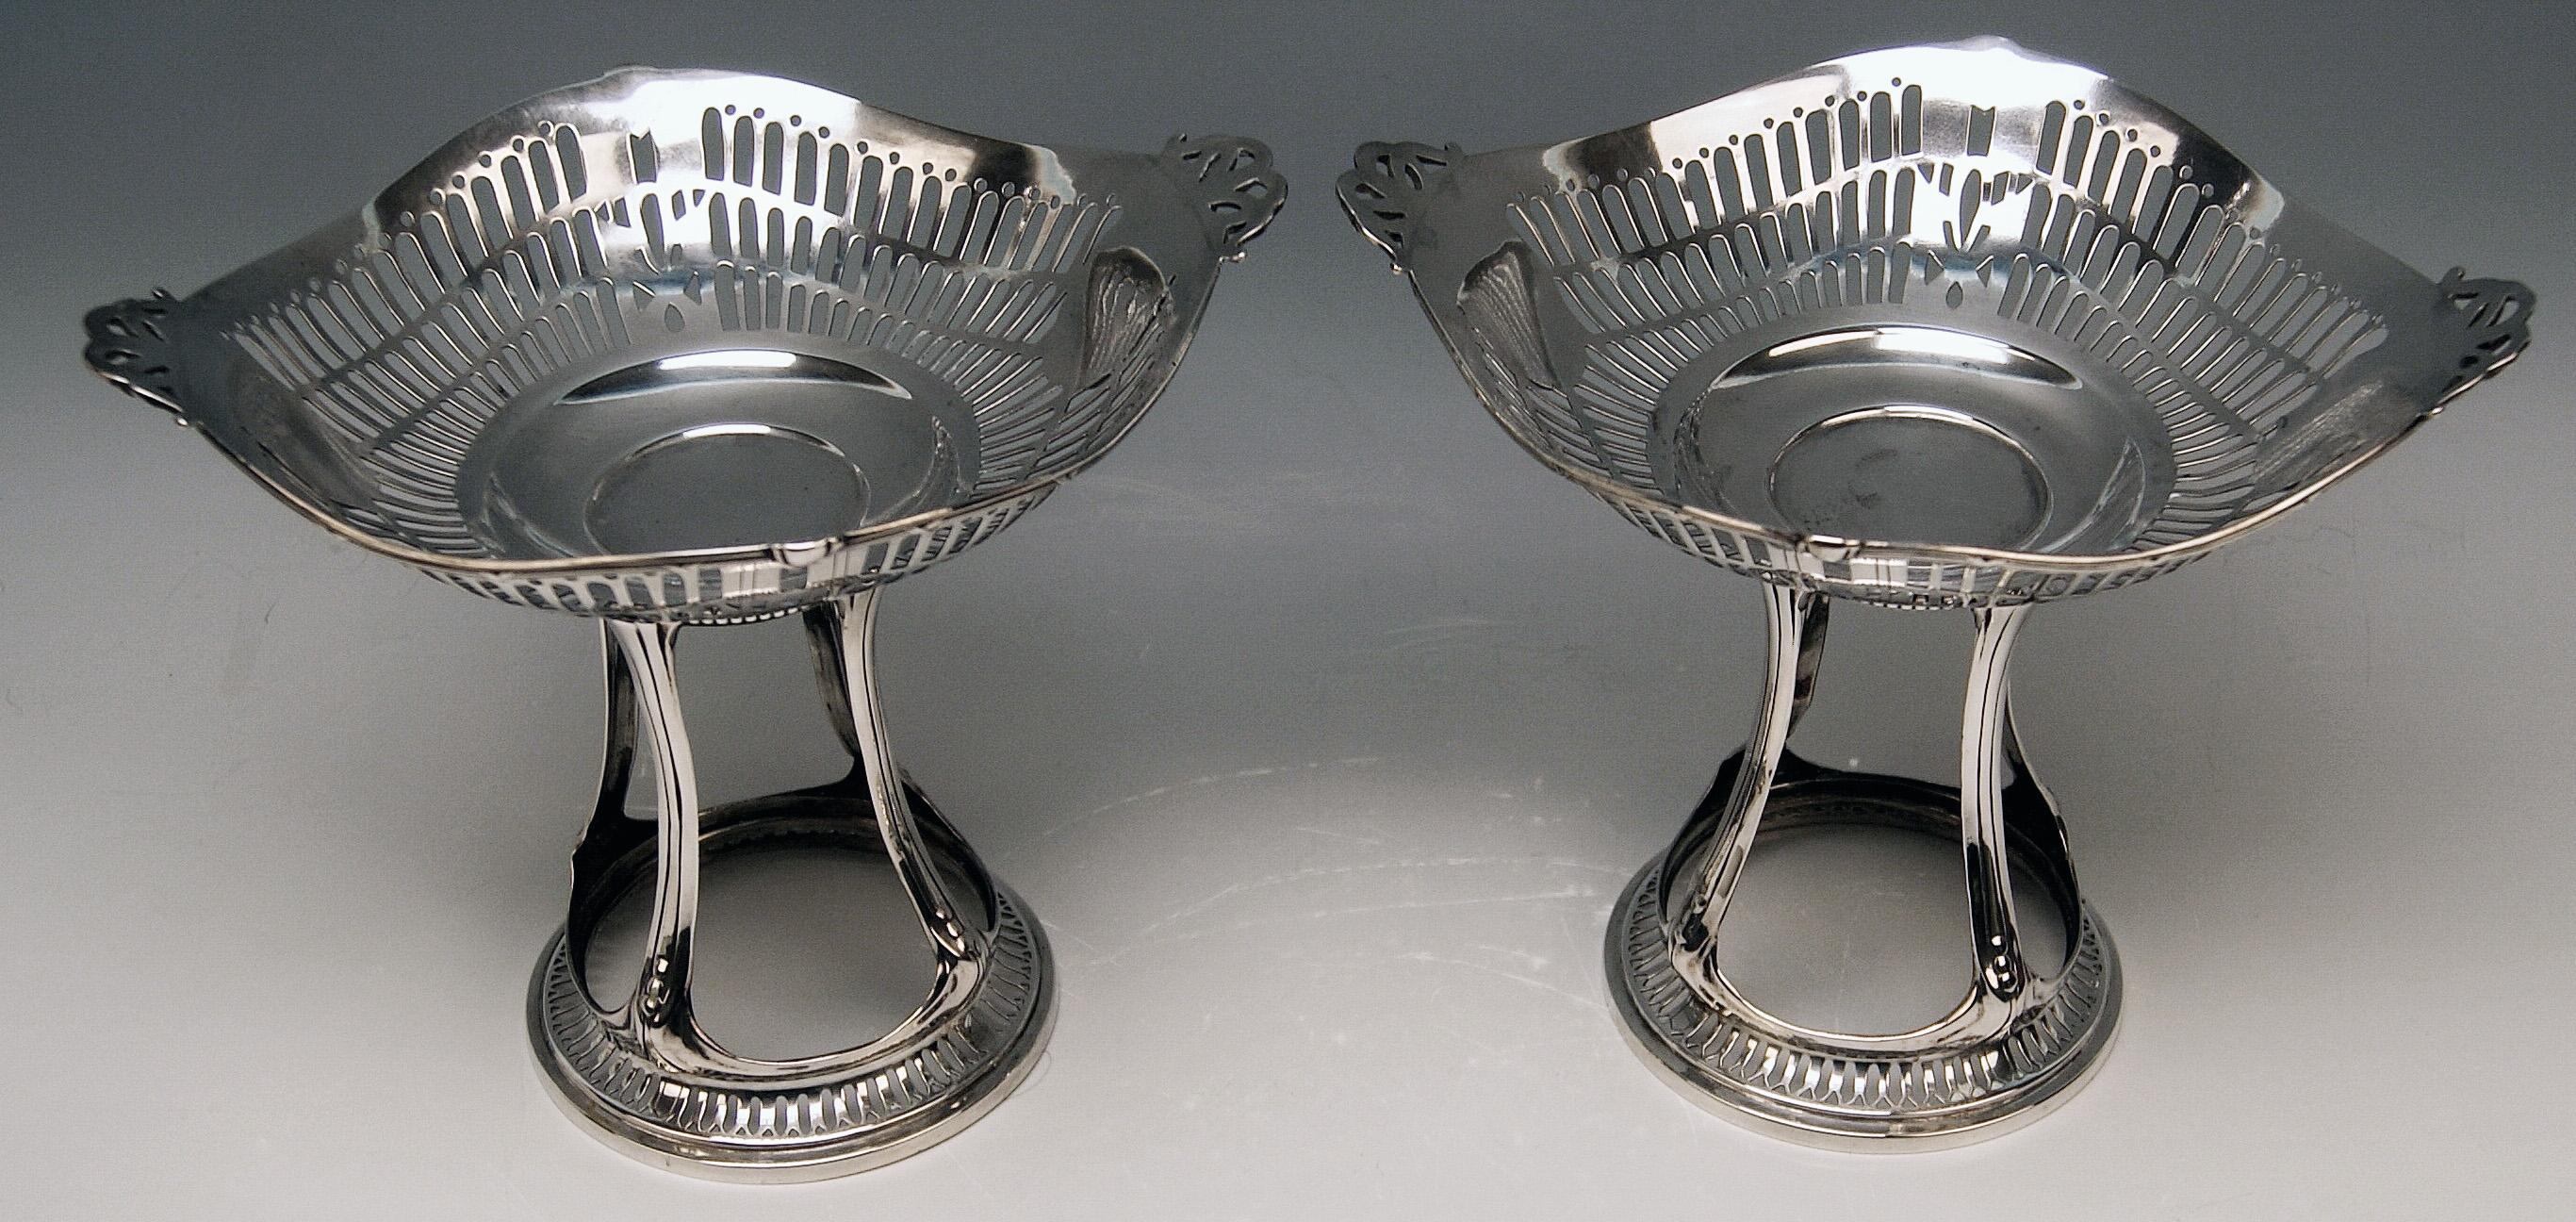 Silver German pair of centrepieces / centerpieces made by Bruckmann & Sons (Germany).

Art Nouveau (made circa 1900)
Silver 800
branded by German Crescent with Crown
Manufactory: 
Eagle Mark of Bruckmann & Soehne (= SONS), Heilbronn (Germany)